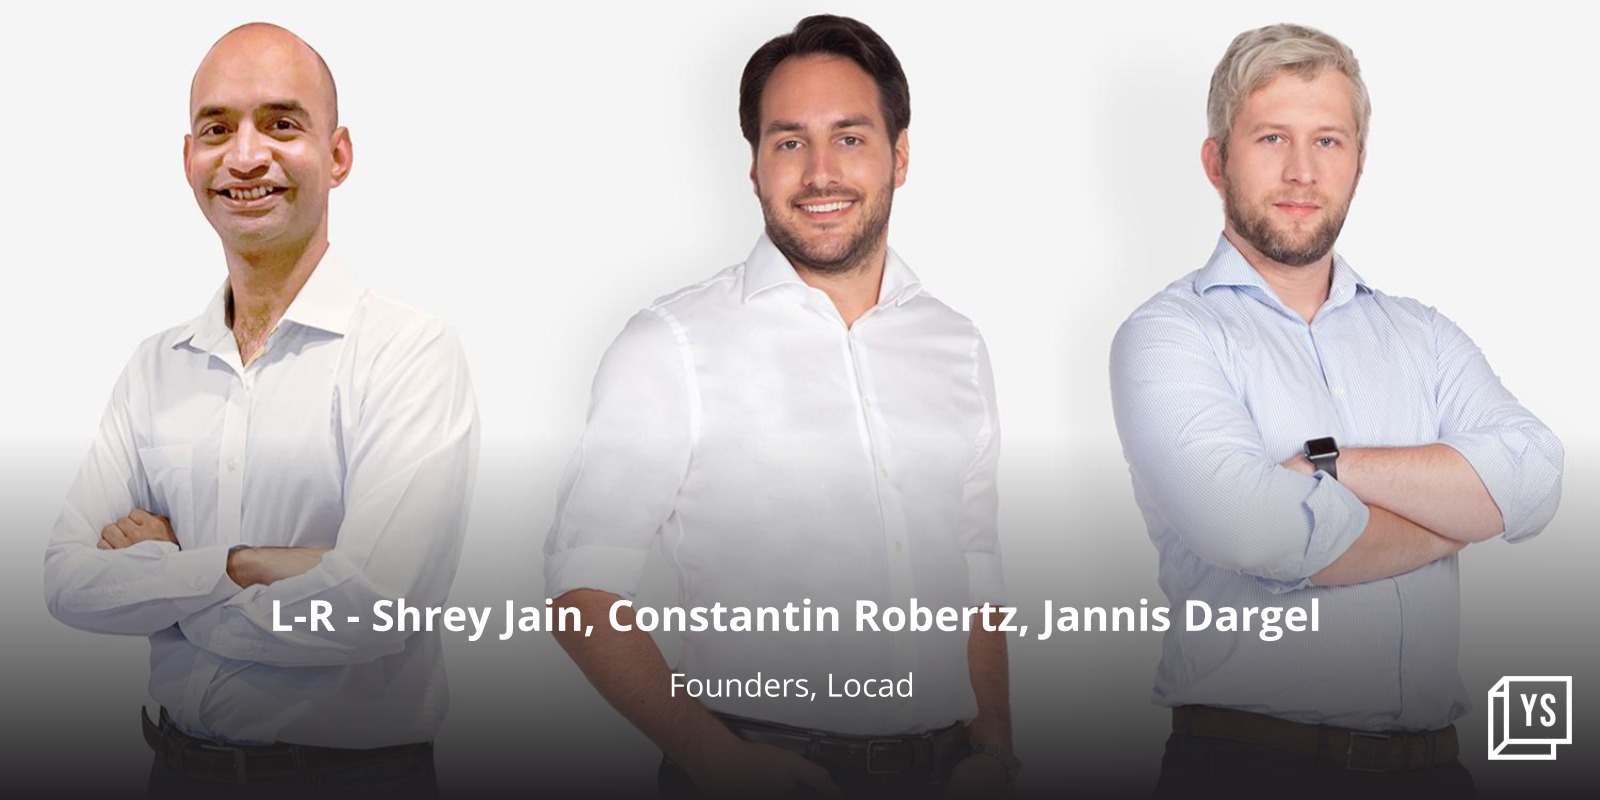 Locad raises $11M Series A funding led by Reefknot Investments